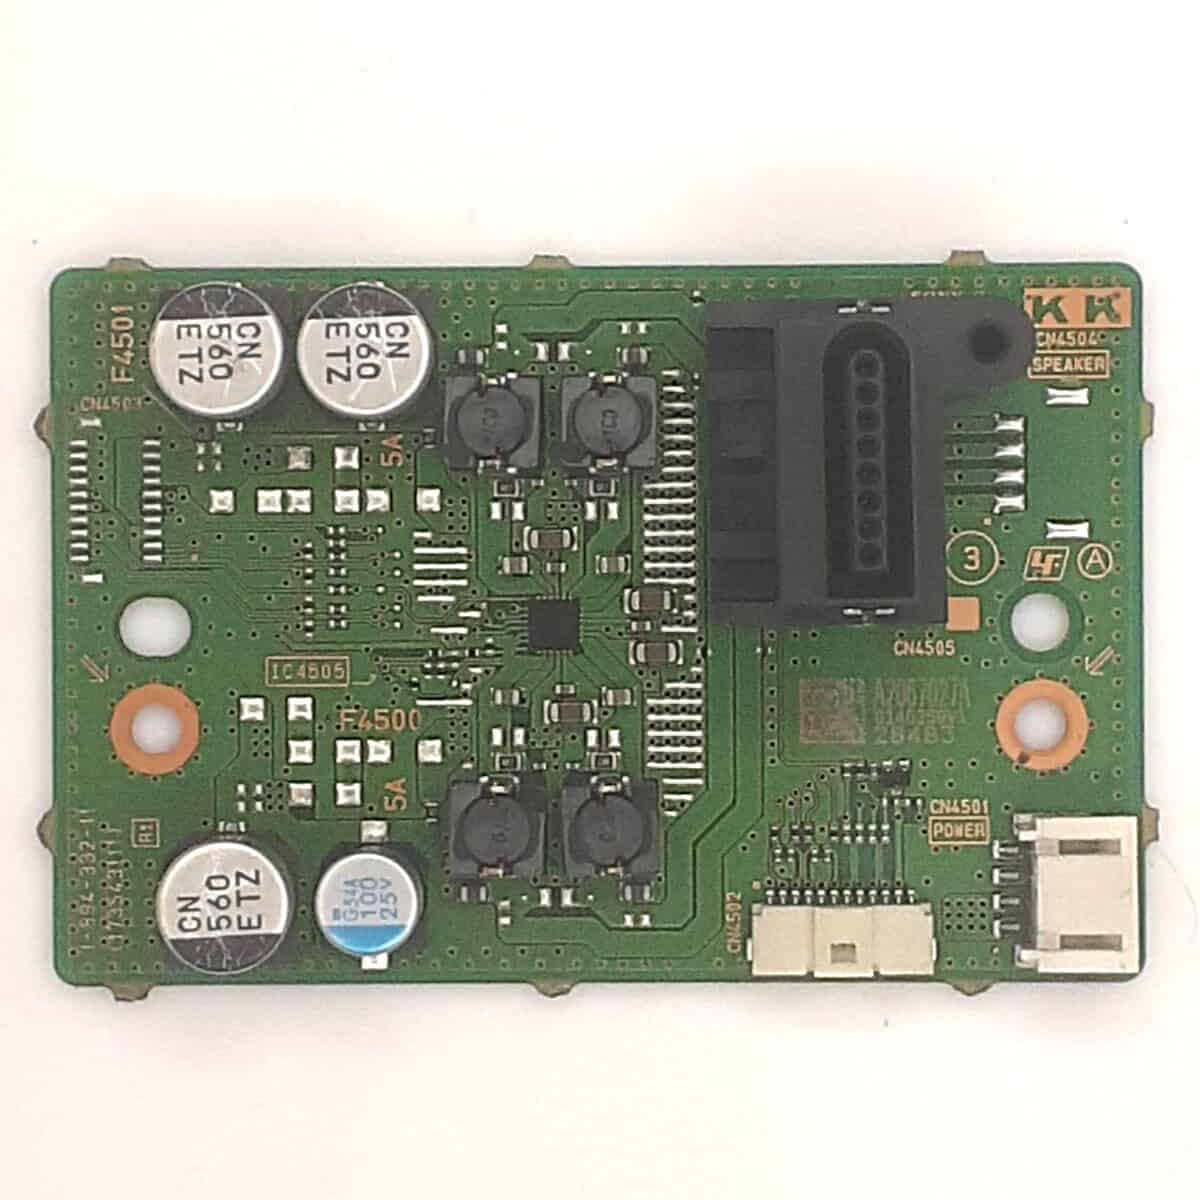 50W950-SONY-INVARTAR-BOARD-FOR-LED-TV--rotated copy